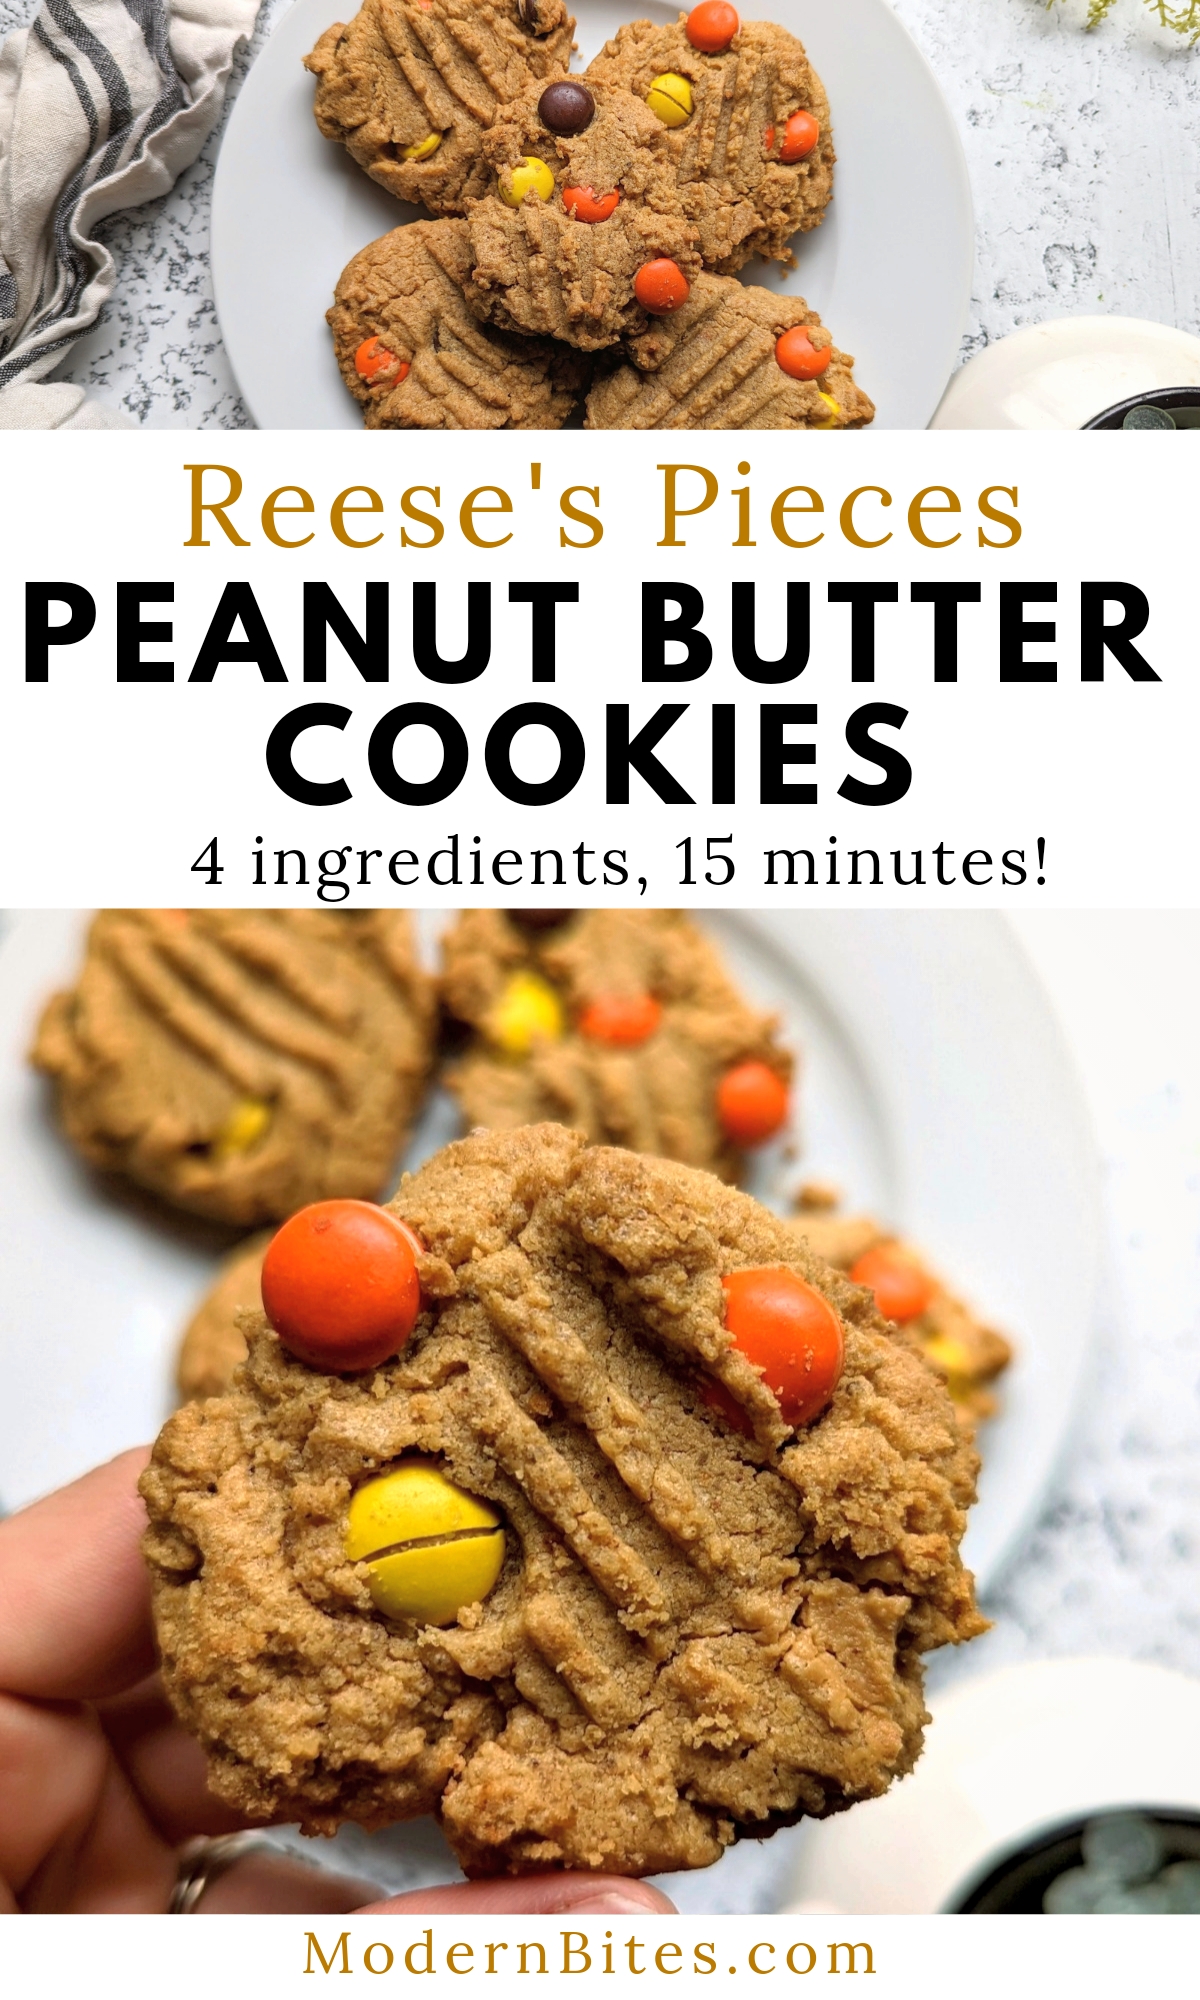 reese's pieces peanut butter cookies recipe easy viral cookies recipes